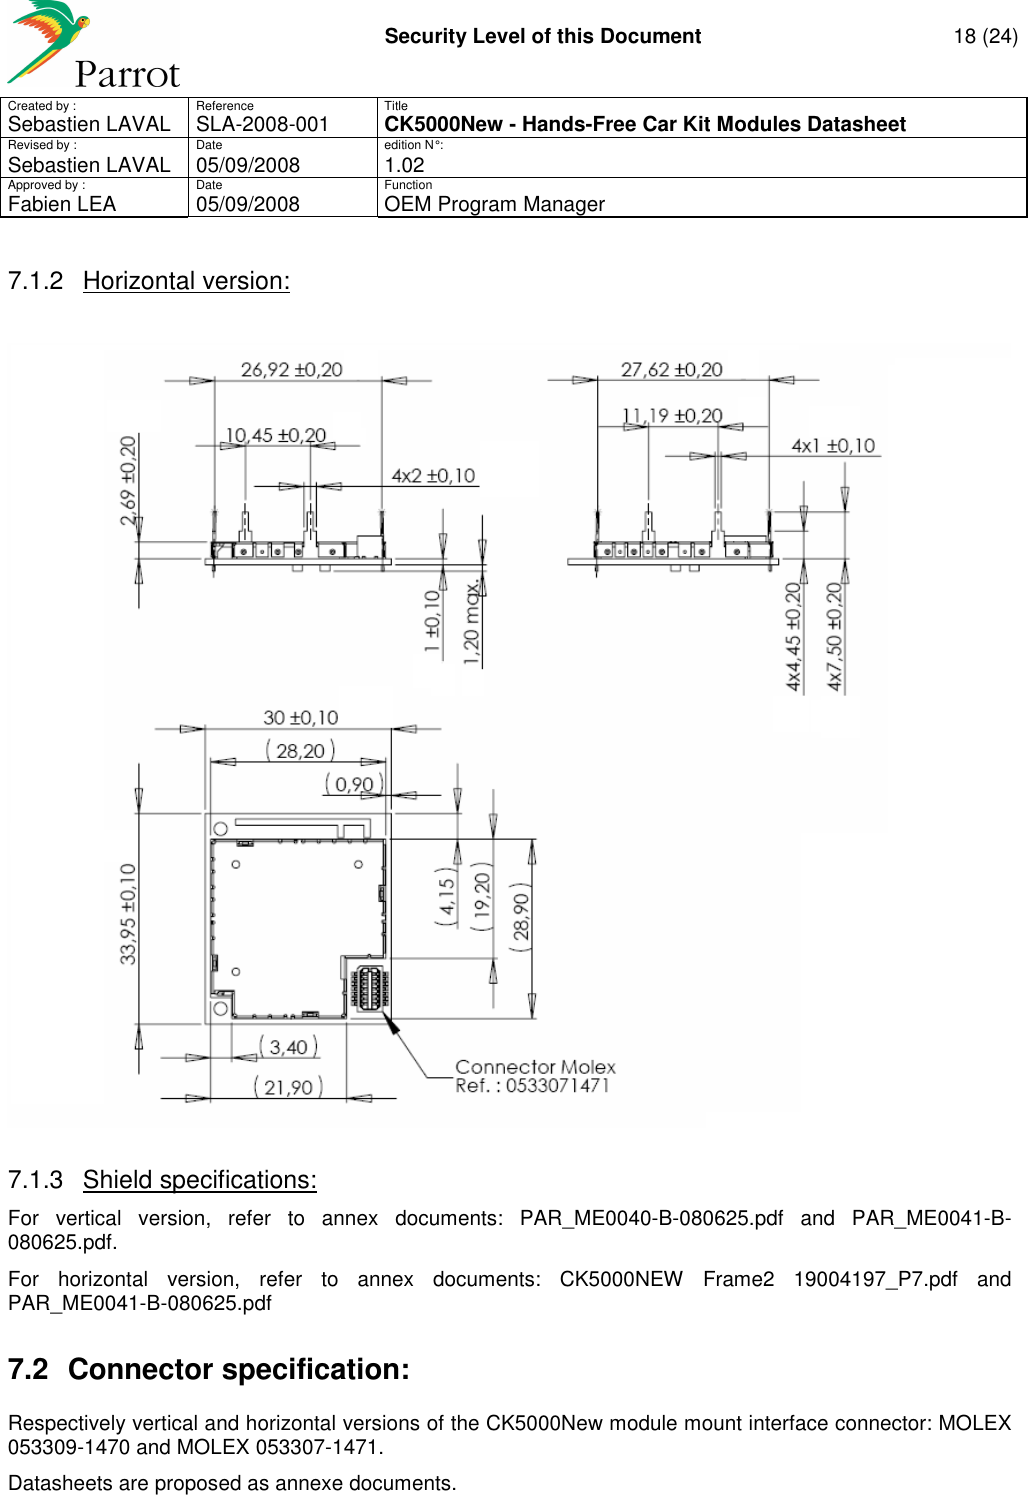     Security Level of this Document  18 (24) Created by :  Reference  Title Sebastien LAVAL   SLA-2008-001 CK5000New - Hands-Free Car Kit Modules Datasheet Revised by :  Date  edition N° : Sebastien LAVAL  05/09/2008  1.02 Approved by :  Date  Function     Fabien LEA  05/09/2008  OEM Program Manager   7.1.2  Horizontal version:   7.1.3  Shield specifications: For  vertical  version,  refer  to  annex  documents:  PAR_ME0040-B-080625.pdf  and  PAR_ME0041-B-080625.pdf. For  horizontal  version,  refer  to  annex  documents:  CK5000NEW  Frame2  19004197_P7.pdf  and PAR_ME0041-B-080625.pdf 7.2  Connector specification: Respectively vertical and horizontal versions of the CK5000New module mount interface connector: MOLEX 053309-1470 and MOLEX 053307-1471. Datasheets are proposed as annexe documents.  